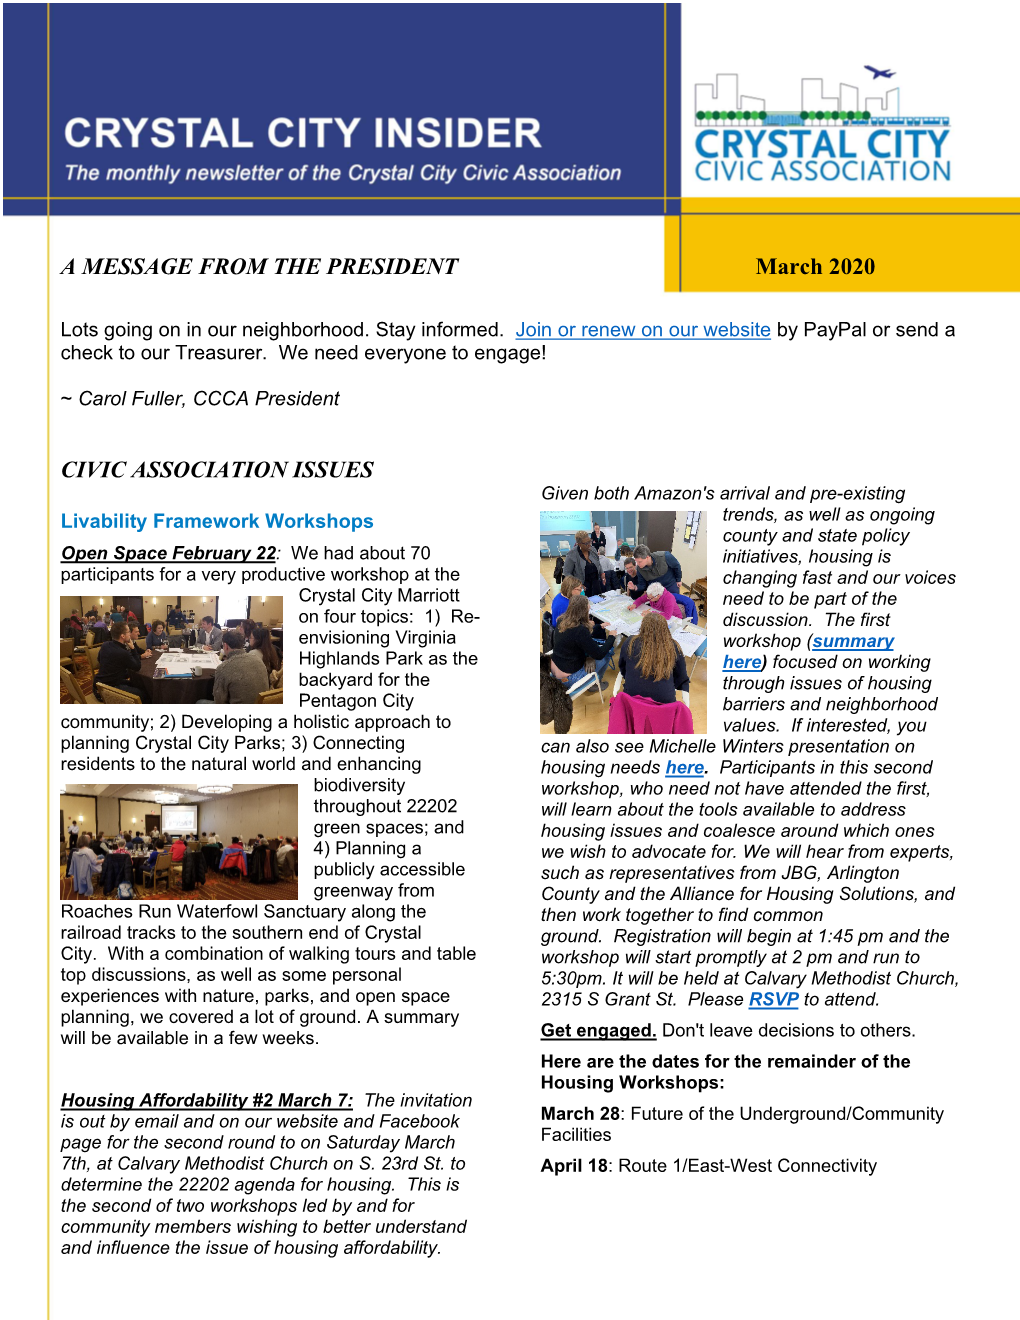 Crystal City Insider: March 2020 Page 1 of 11